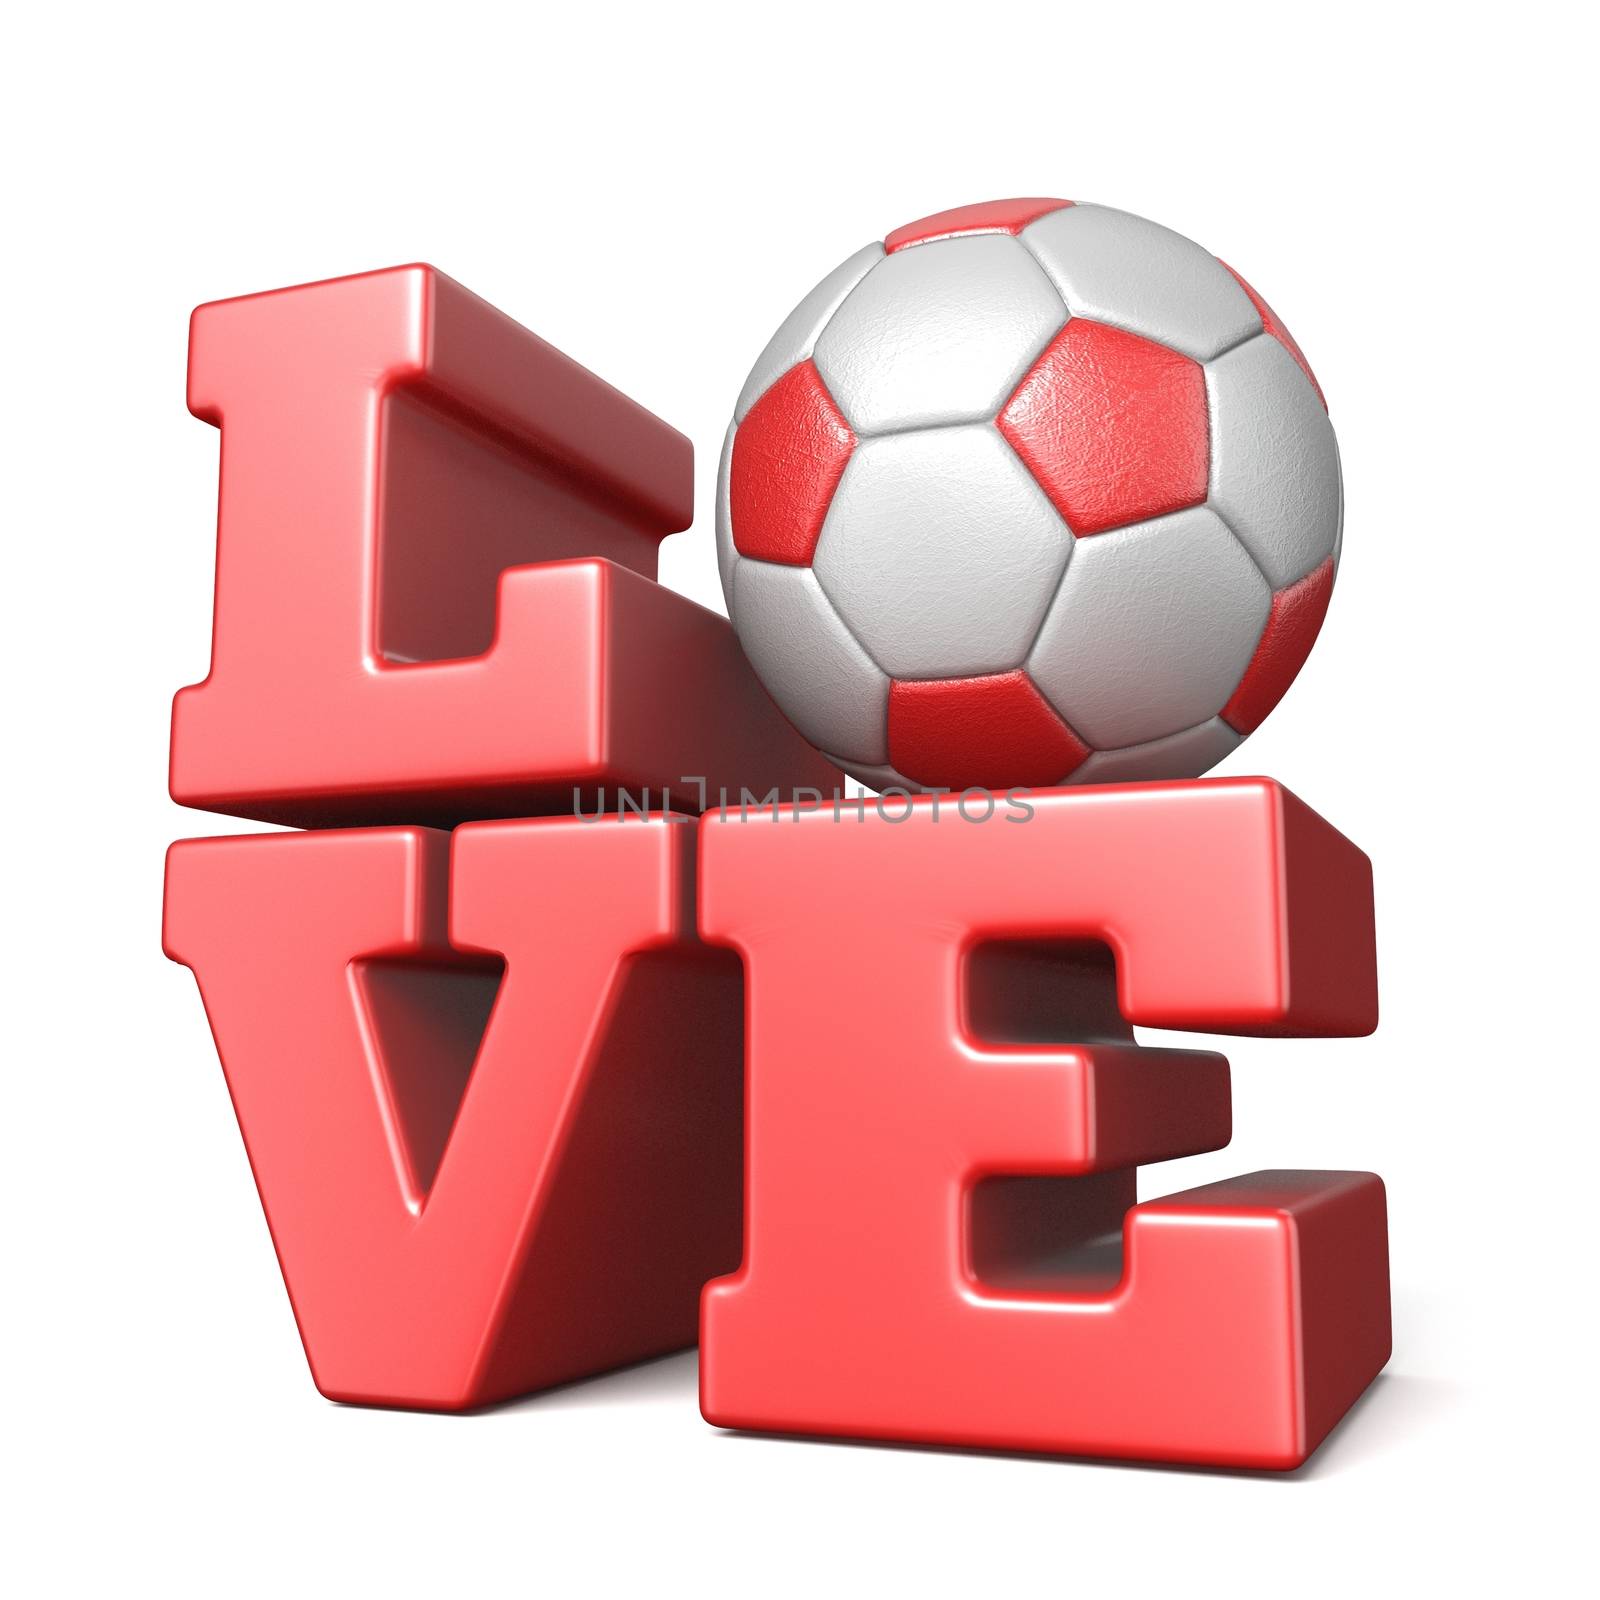 Word LOVE with football soccer ball 3D render illustration isolated on white background